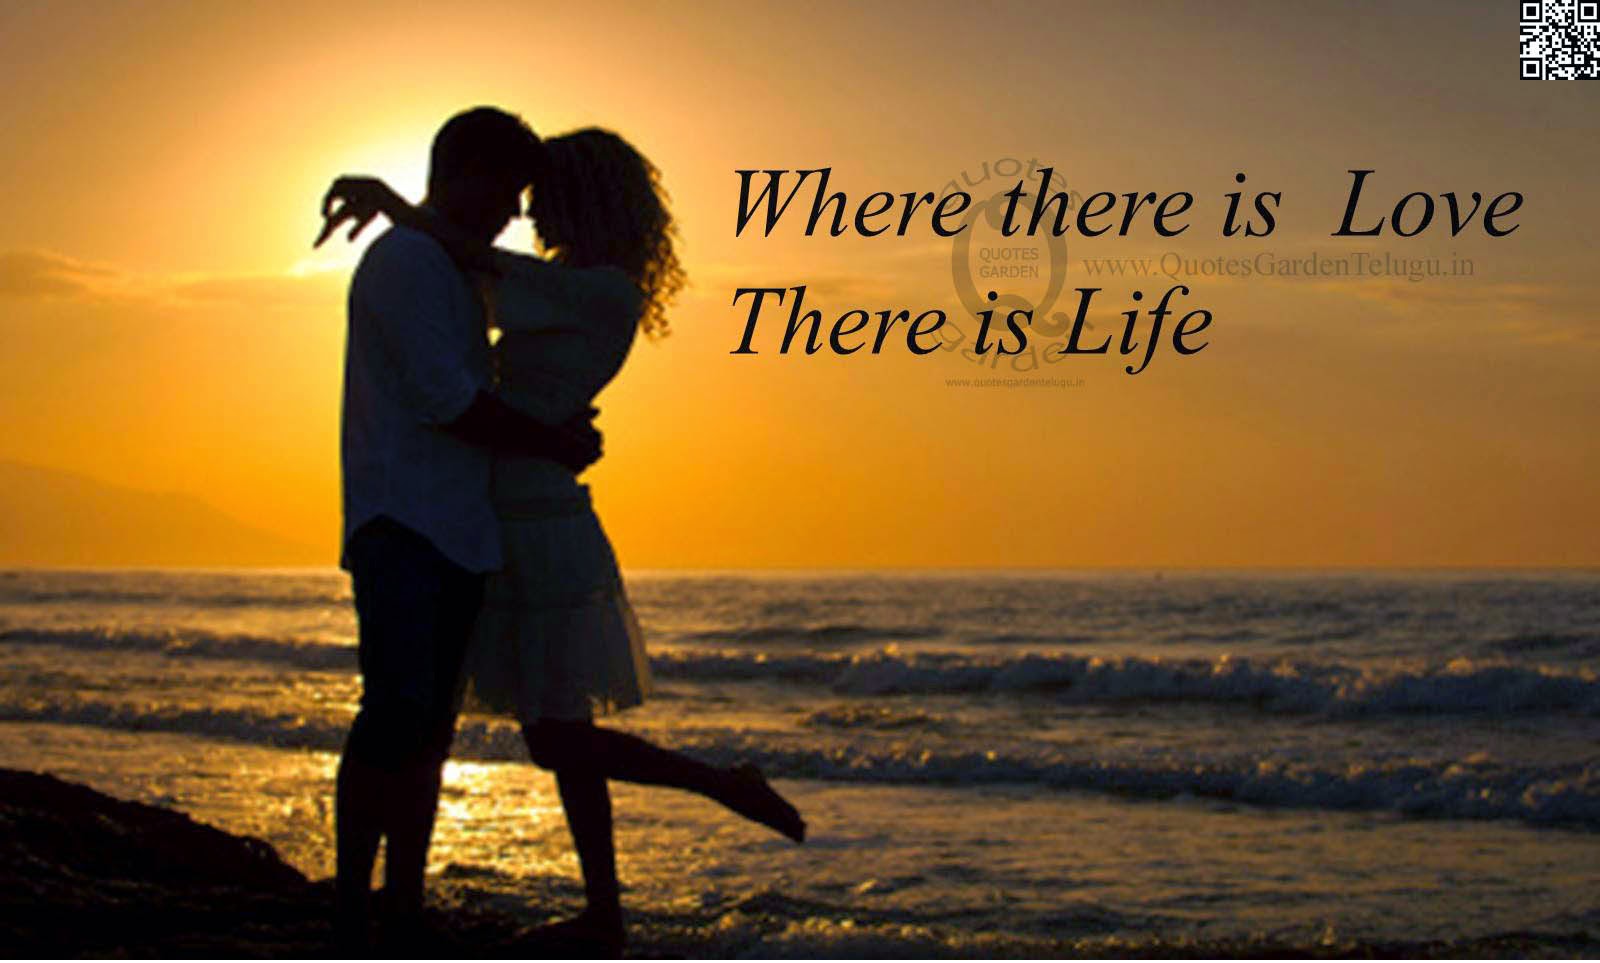  Best  English  Love  Quotes  with Images Best  English  Quotes  